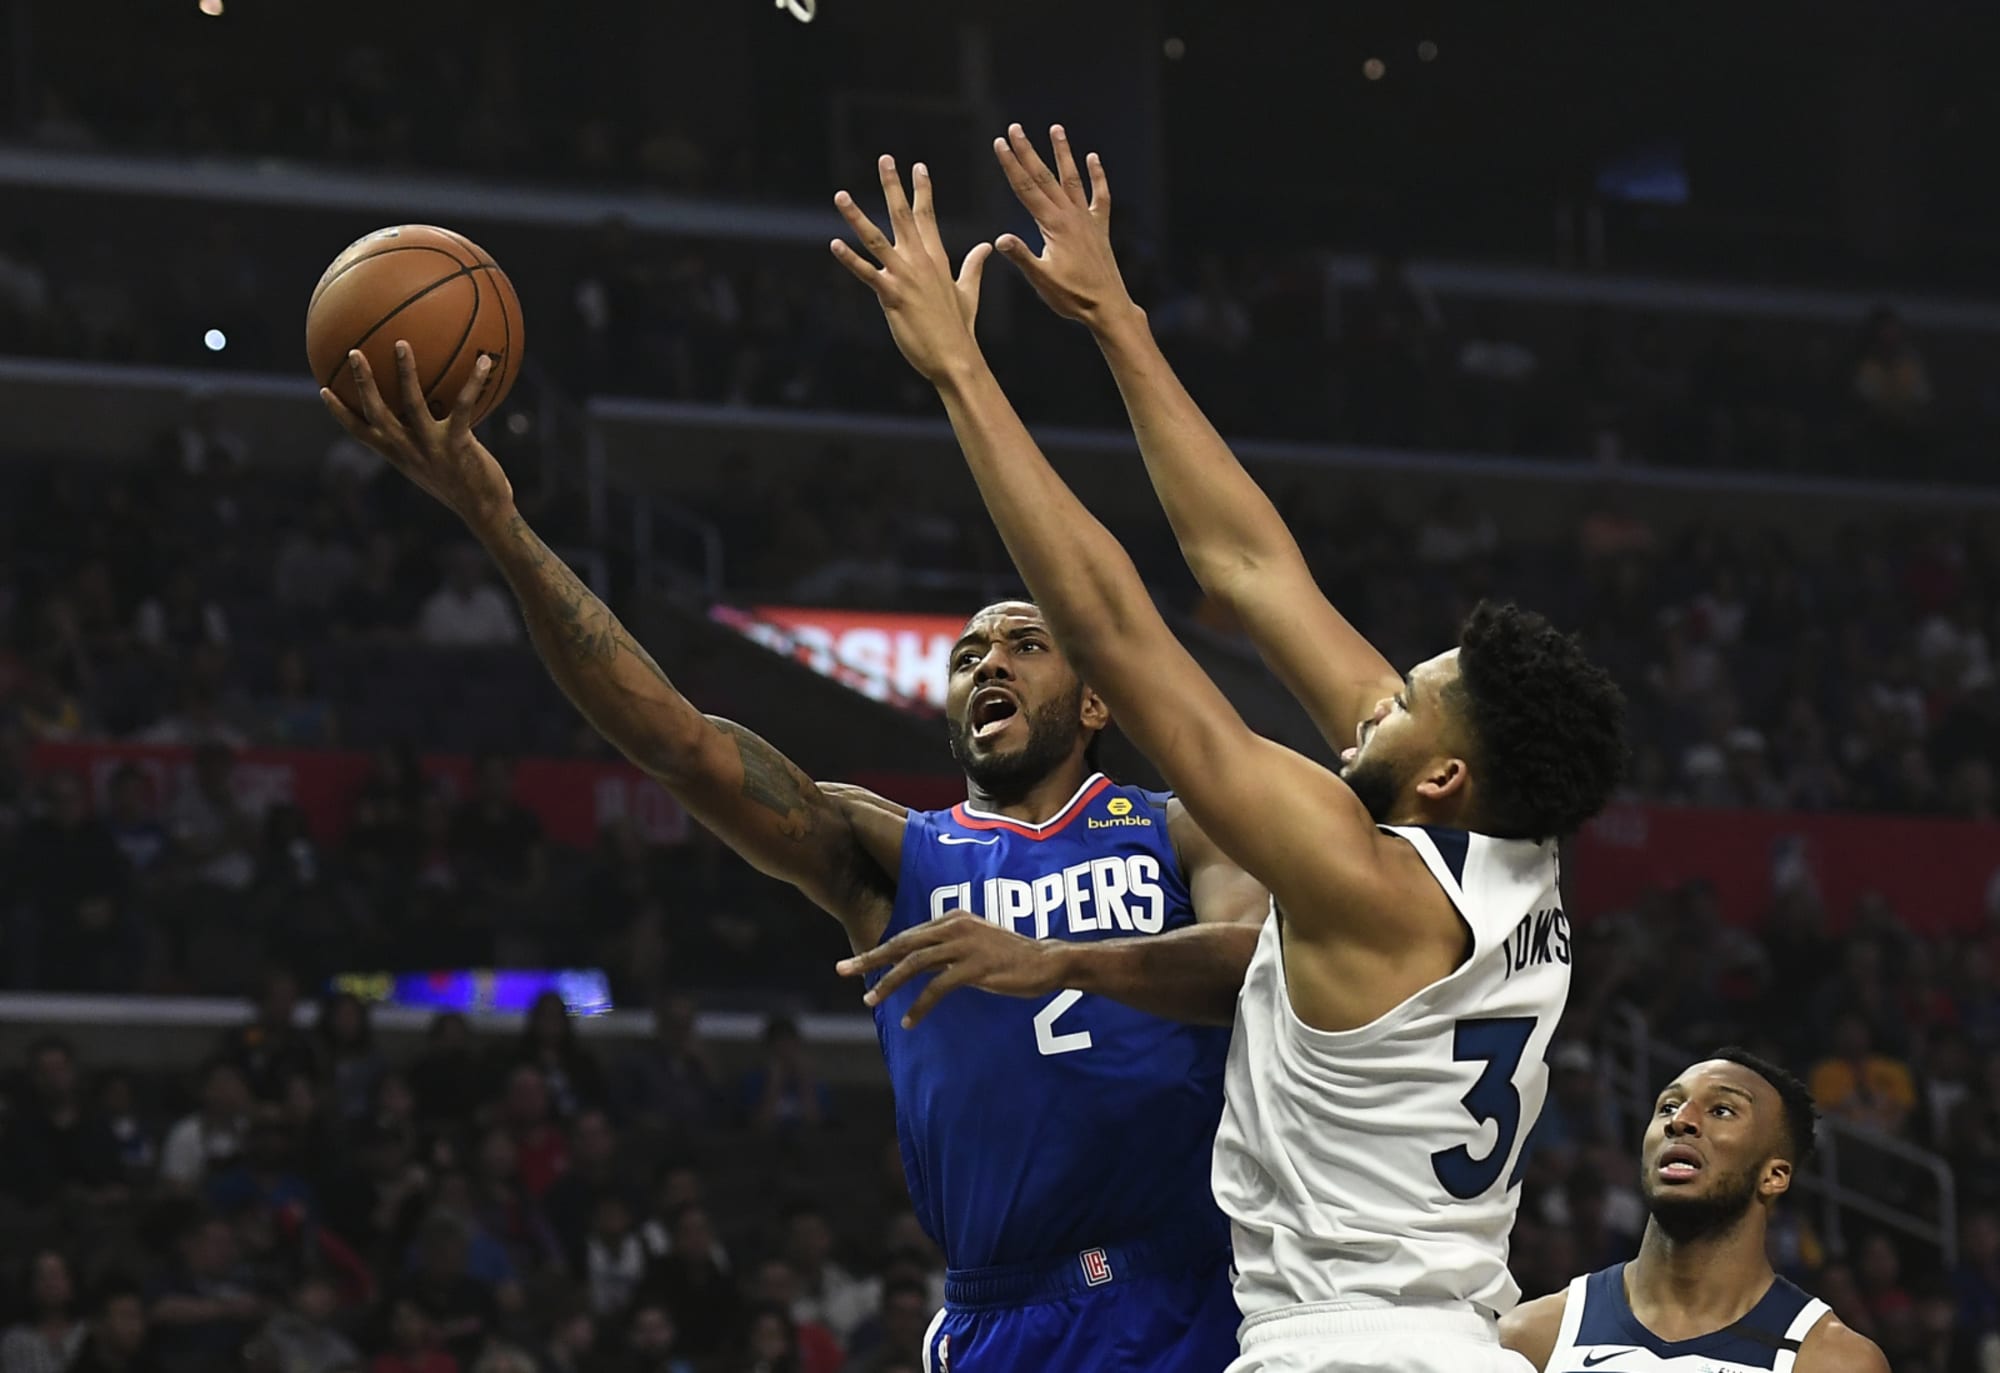 Takeaways From La Clippers Win Over The Minnesota Timberwolves